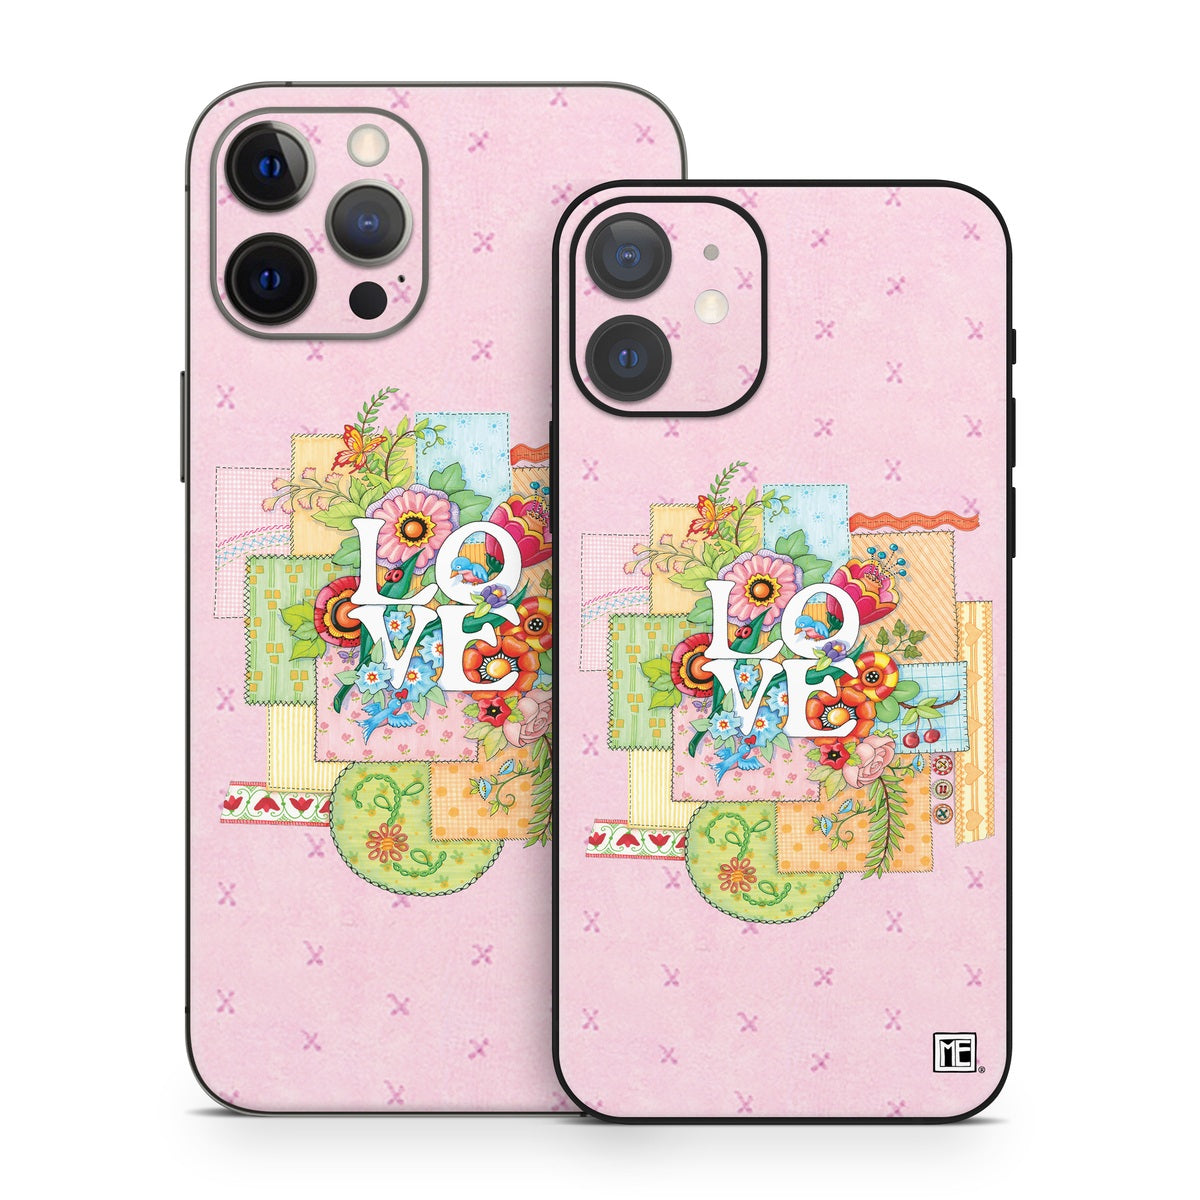 Love And Stitches - Apple iPhone 12 Skin